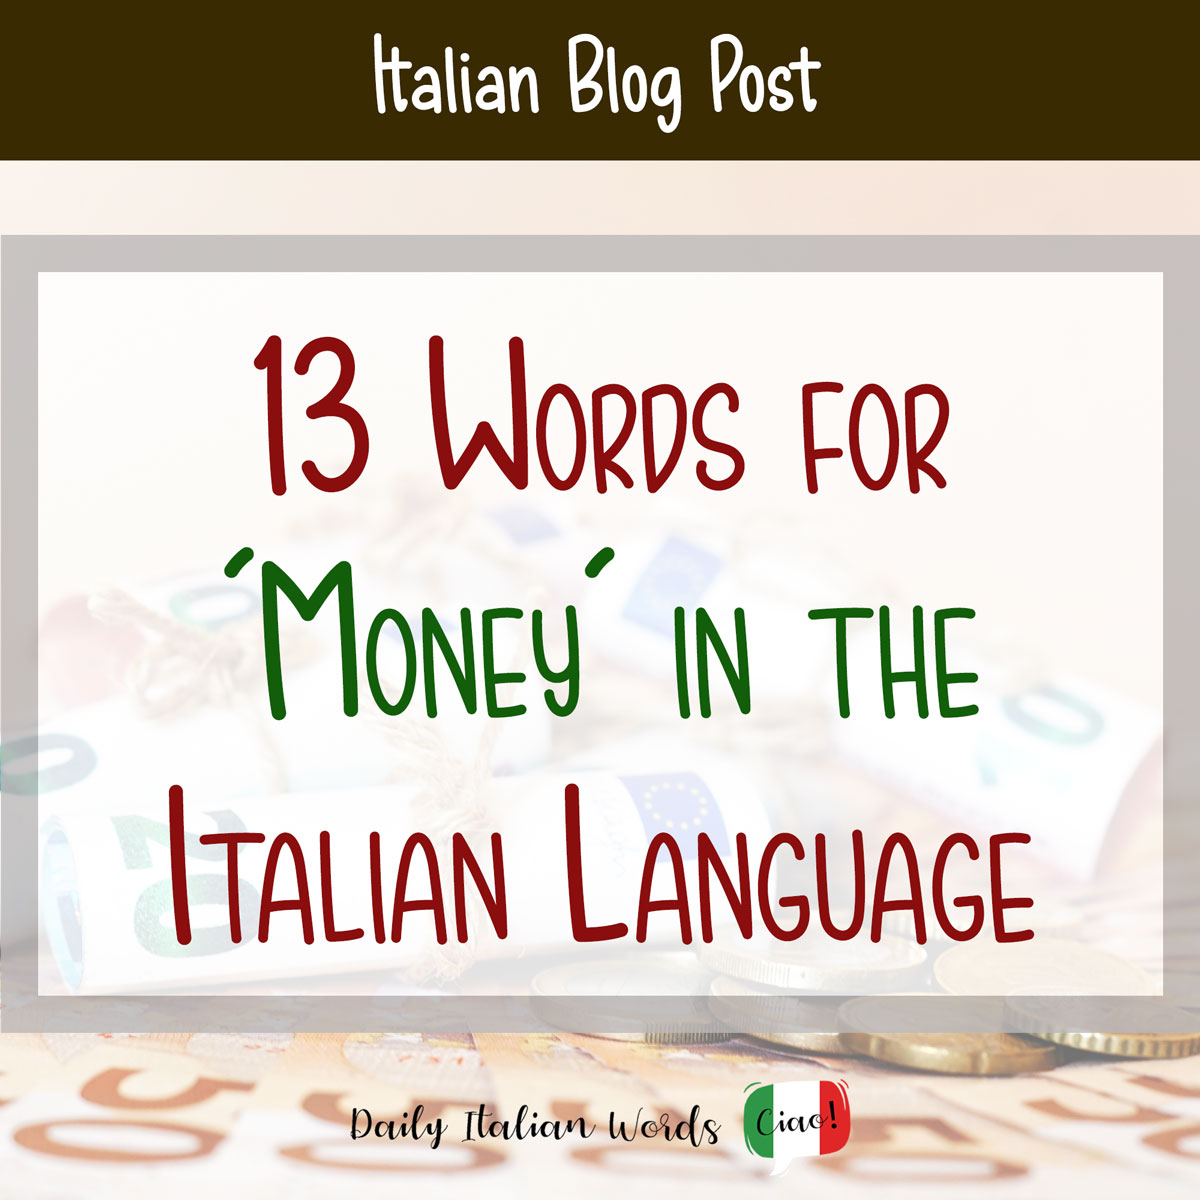 13 Words for “Money” in the Italian Language